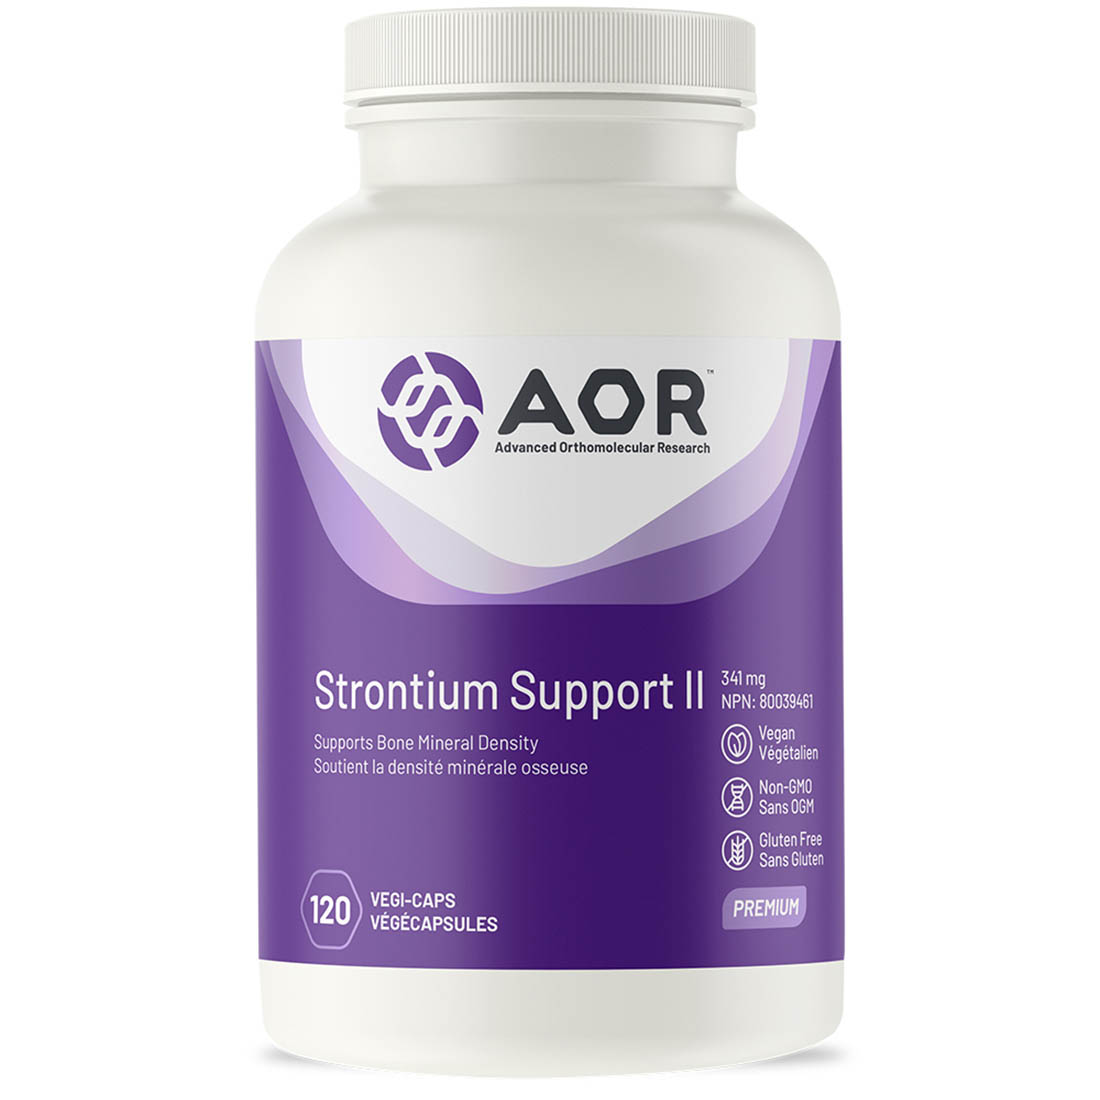 AOR Strontium Support II, 341mg